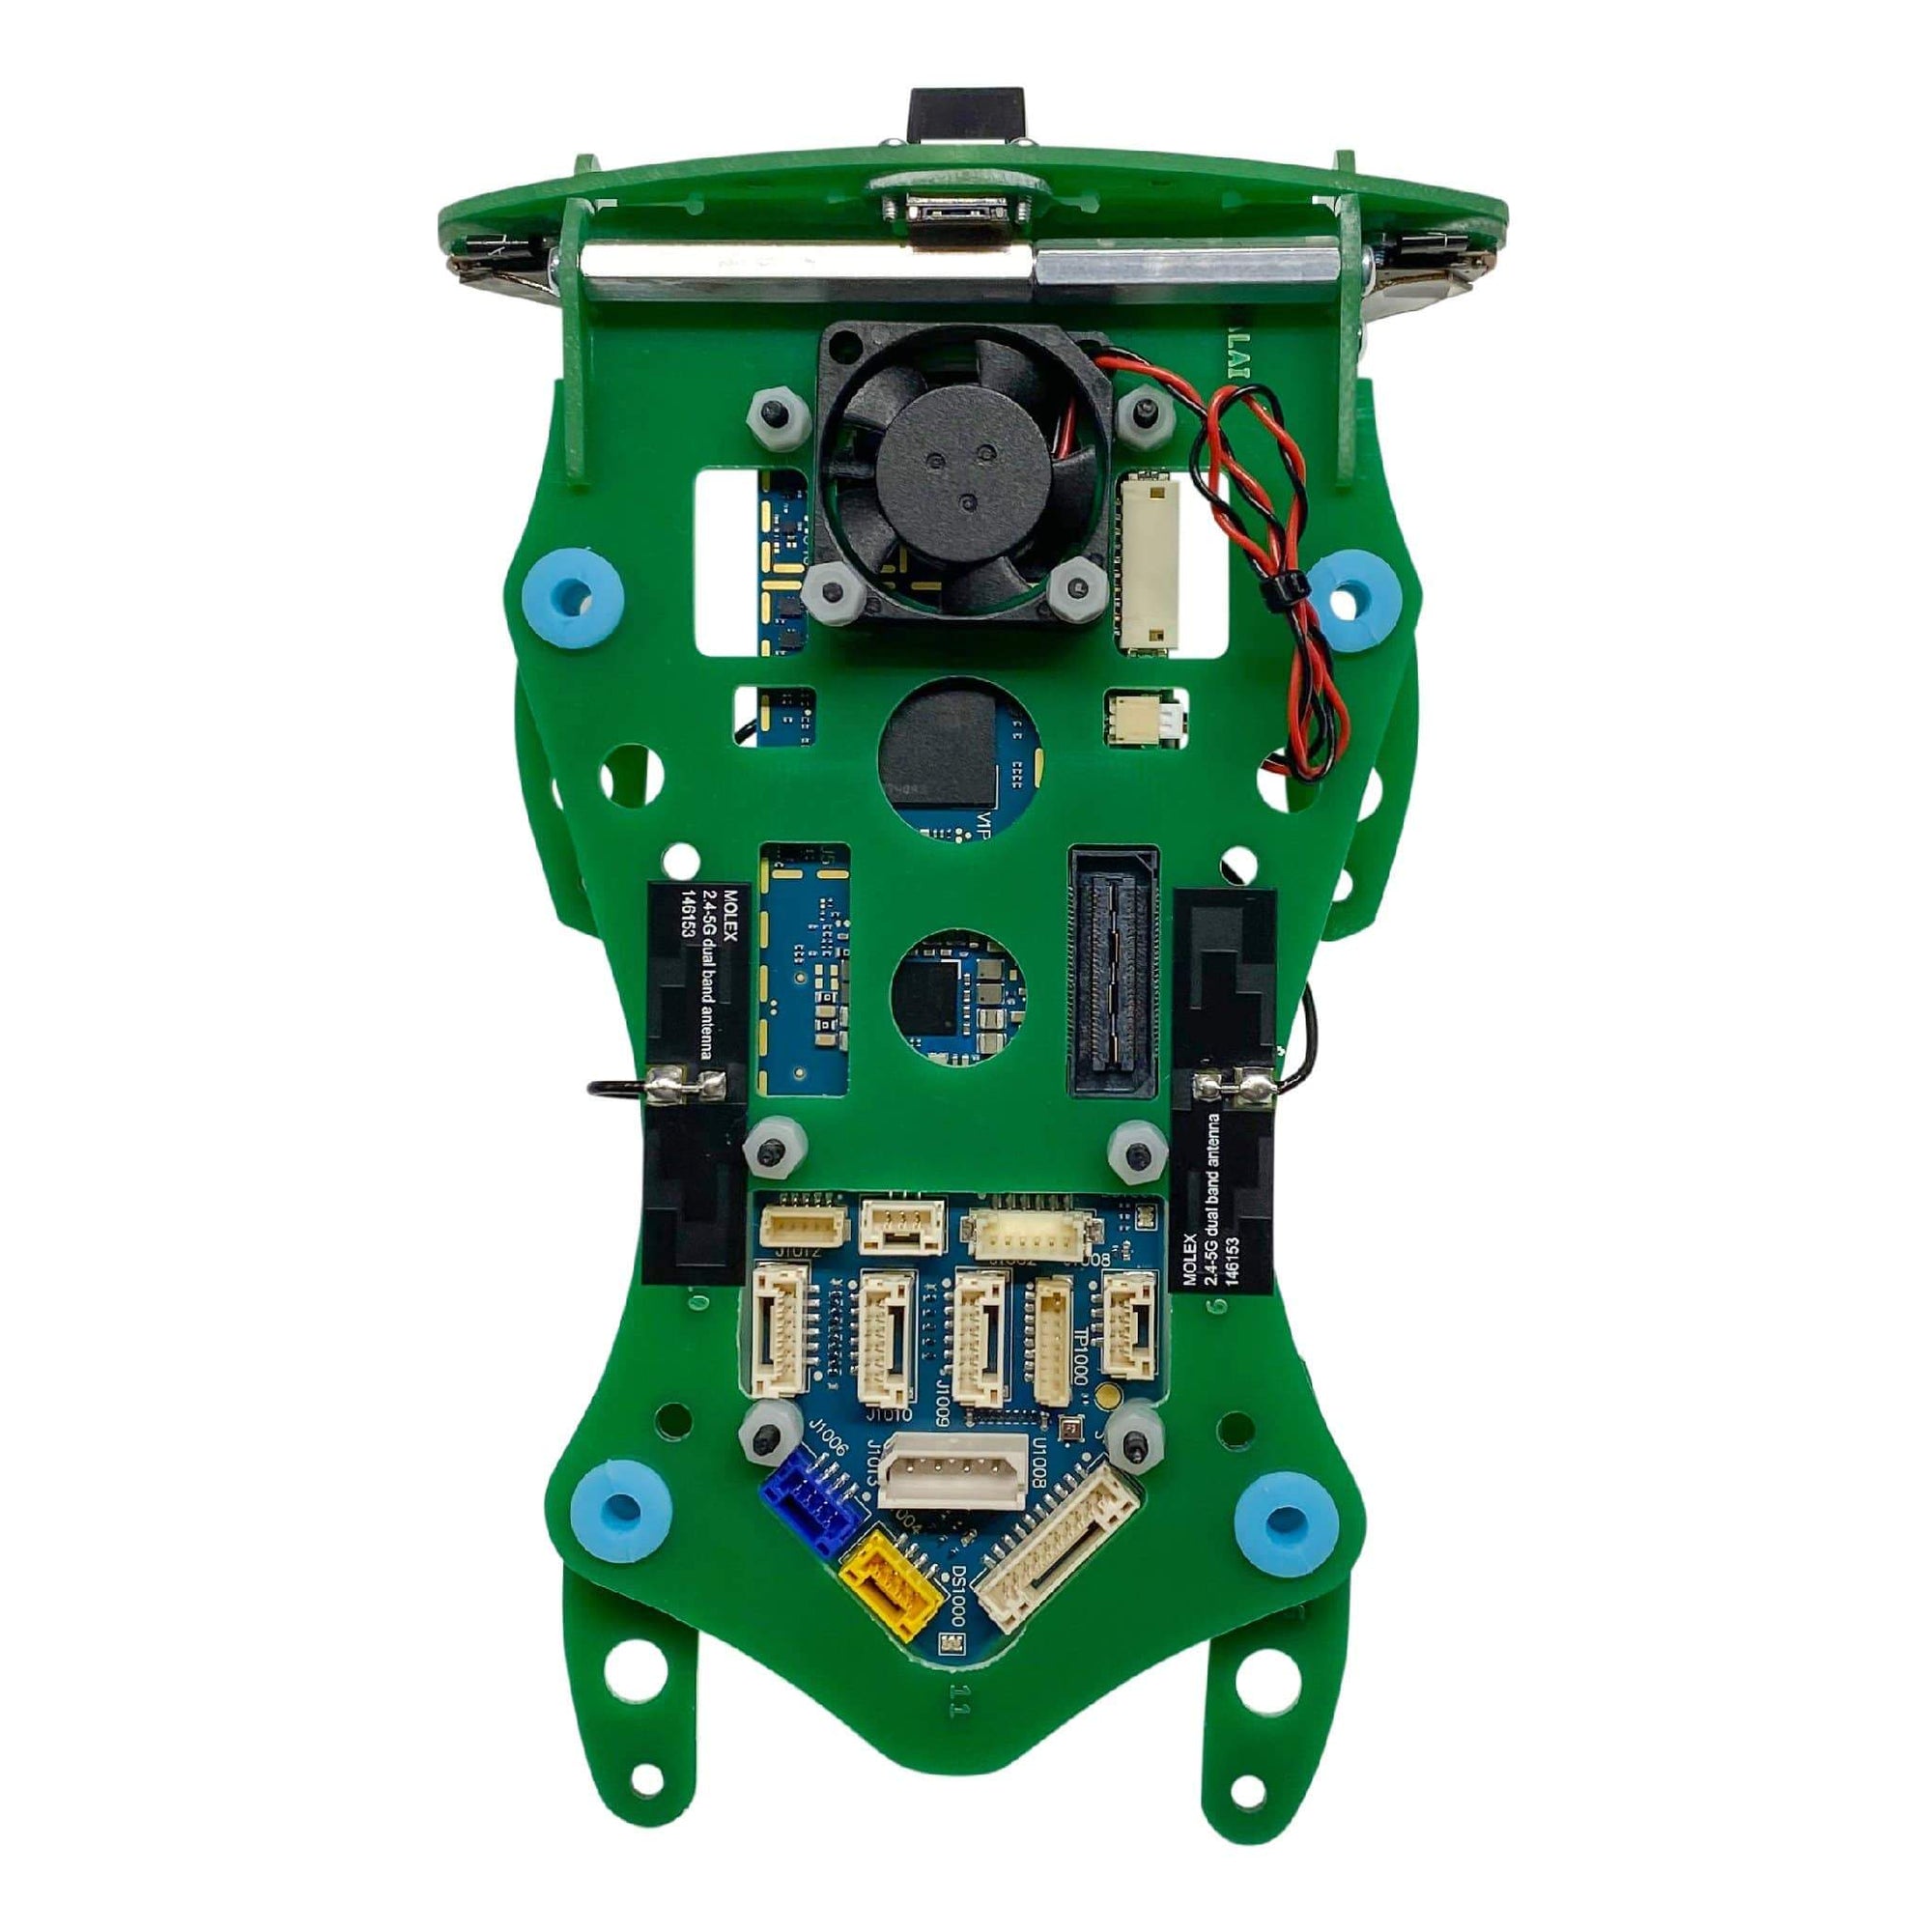 ModalAI, Inc. Dev Kit VOXL Flight Deck - Mount and Fly Autonomously, Assembled Obstacle Avoidance Kit